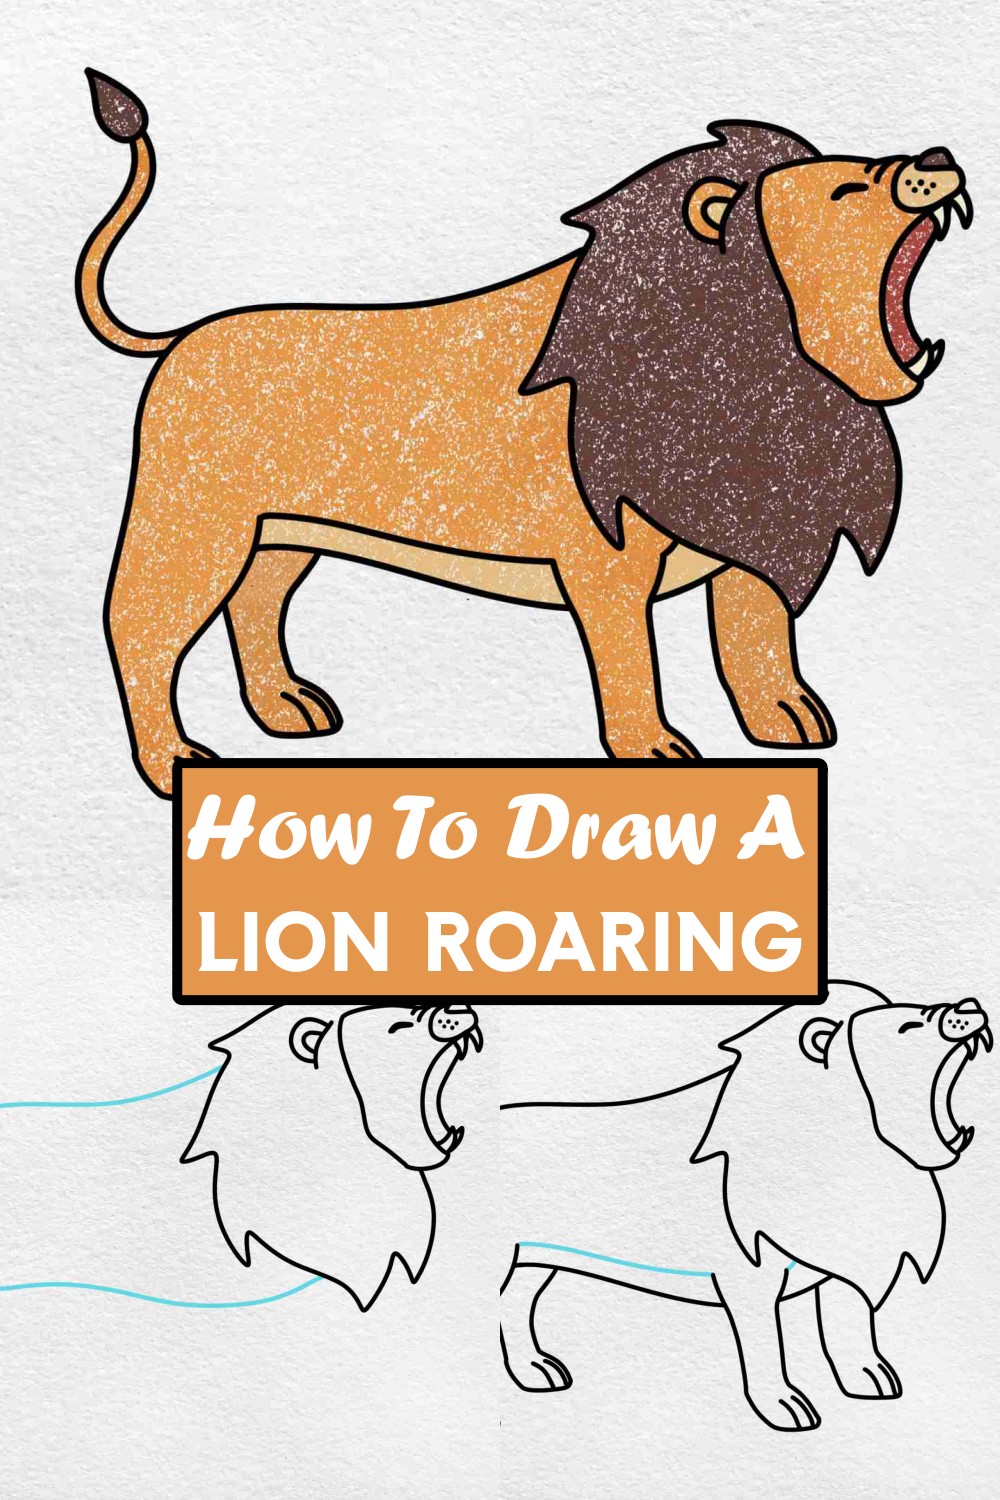 How To Draw A Lion Roaring